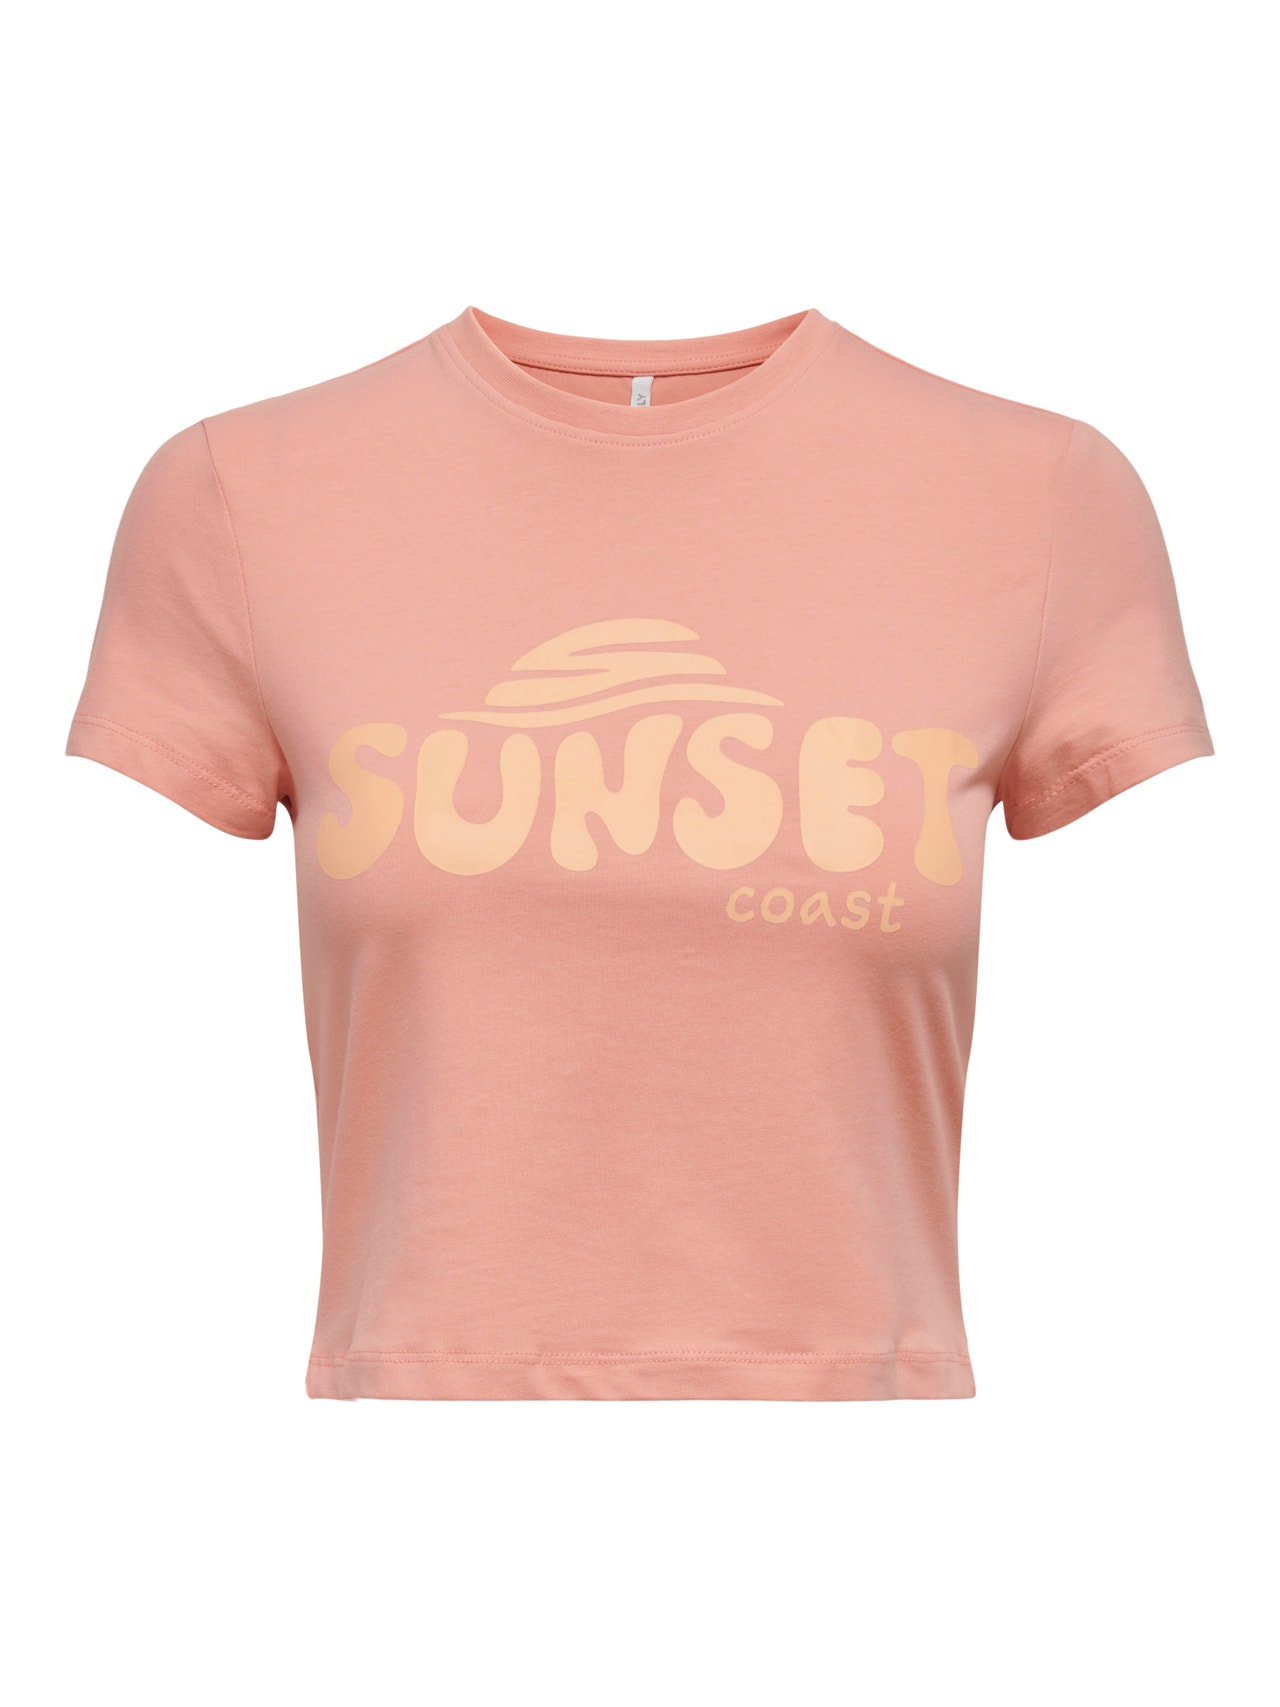 ONLY Normal passform O-ringning T-shirt -Coral Haze - 15296958